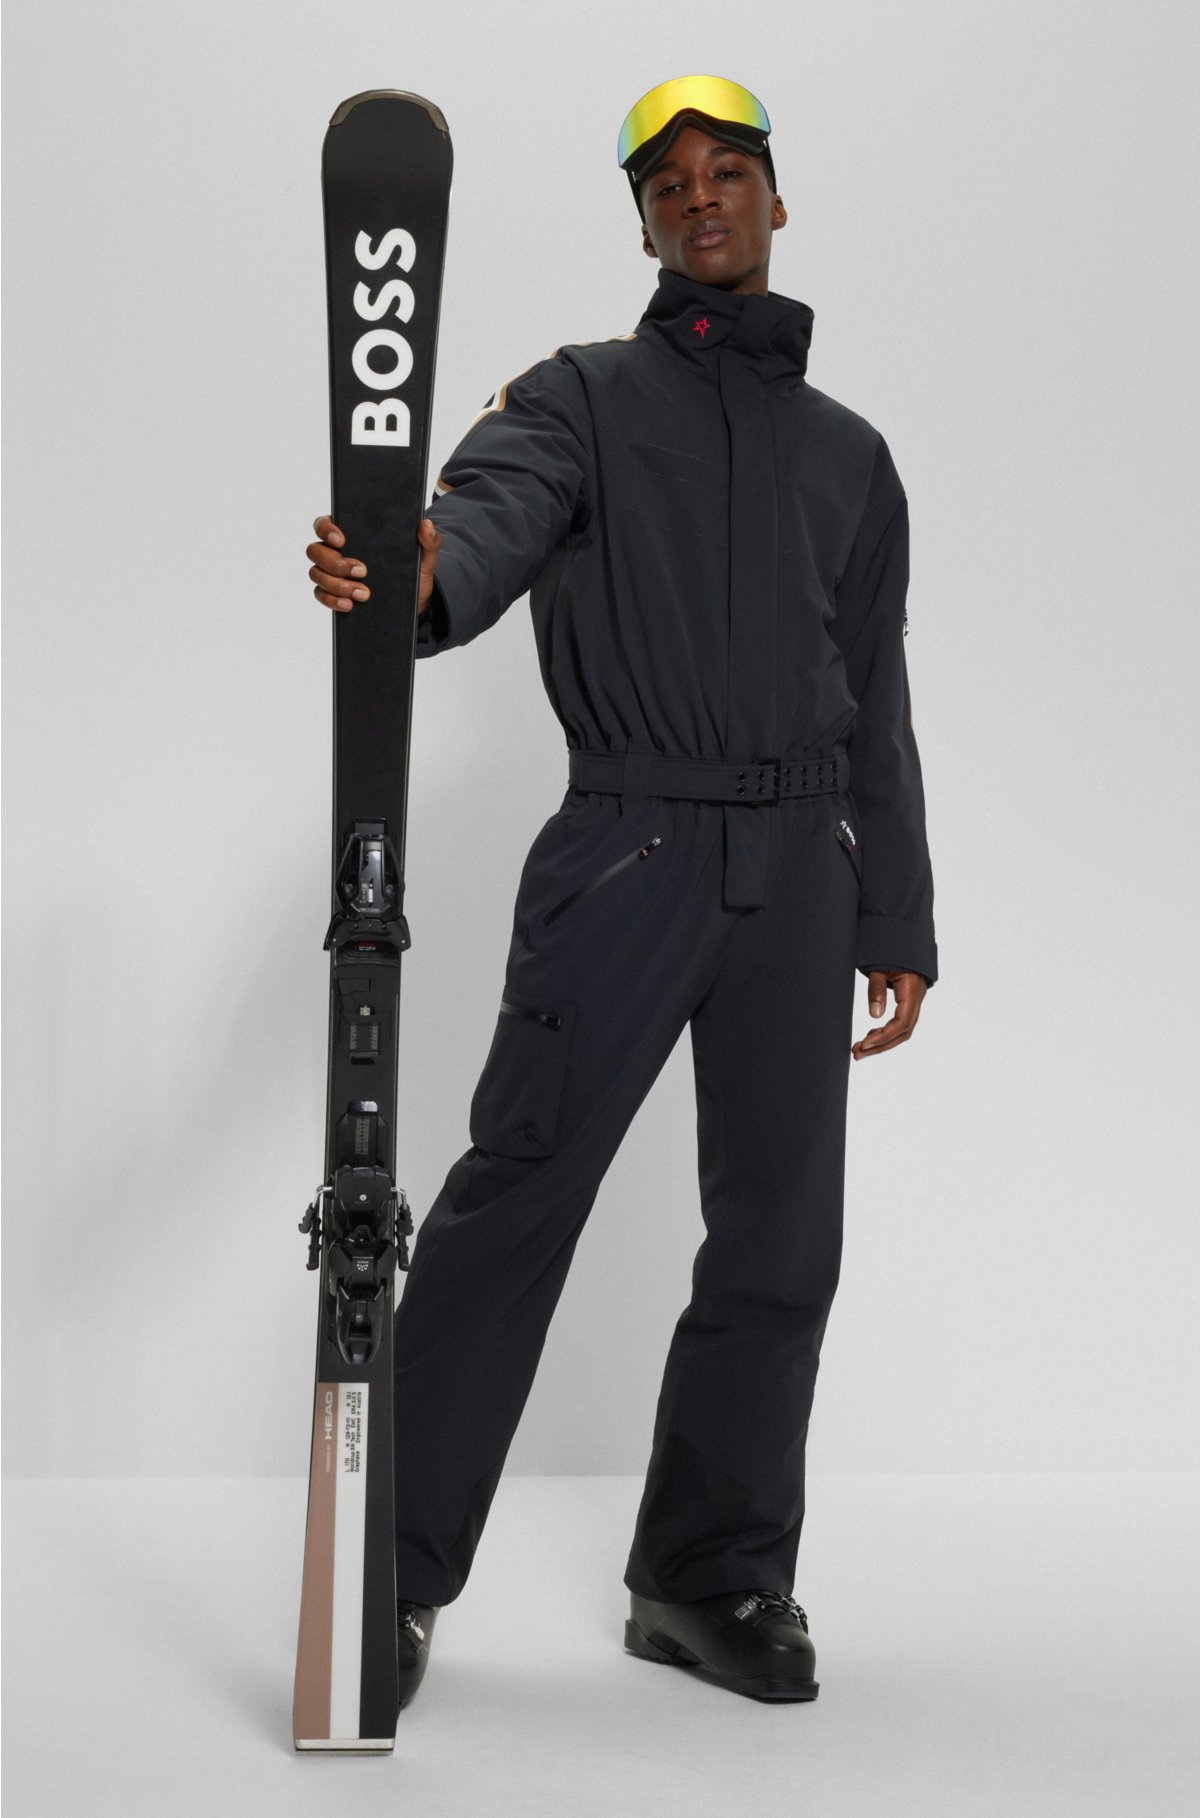 BOSS x Perfect Moment branded ski suit with stripes